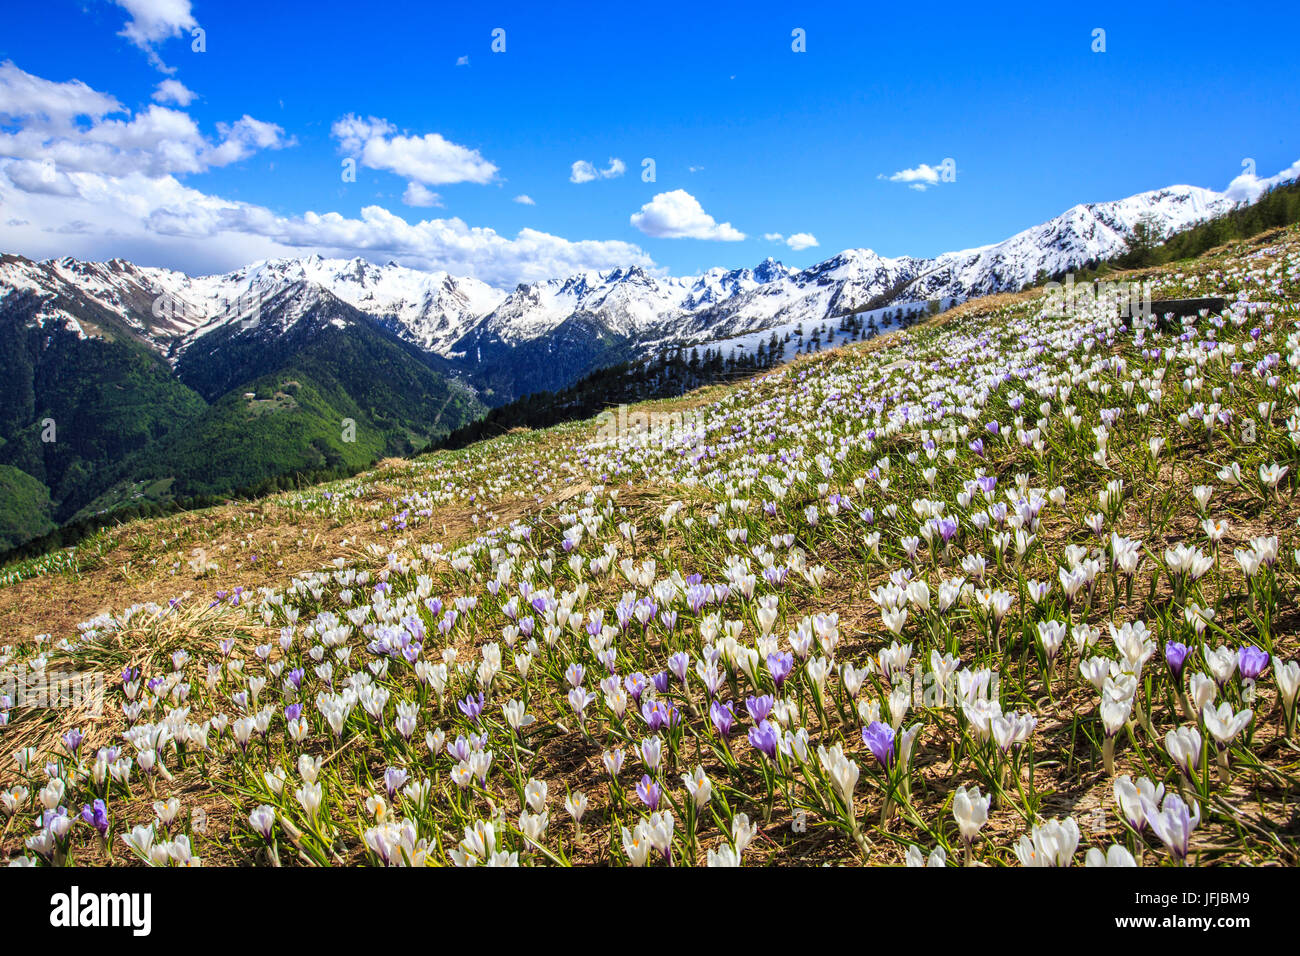 Carpet of Crocus in the pastures of Valgerola, Valtellina, Lombardy, Italy, Europe Stock Photo